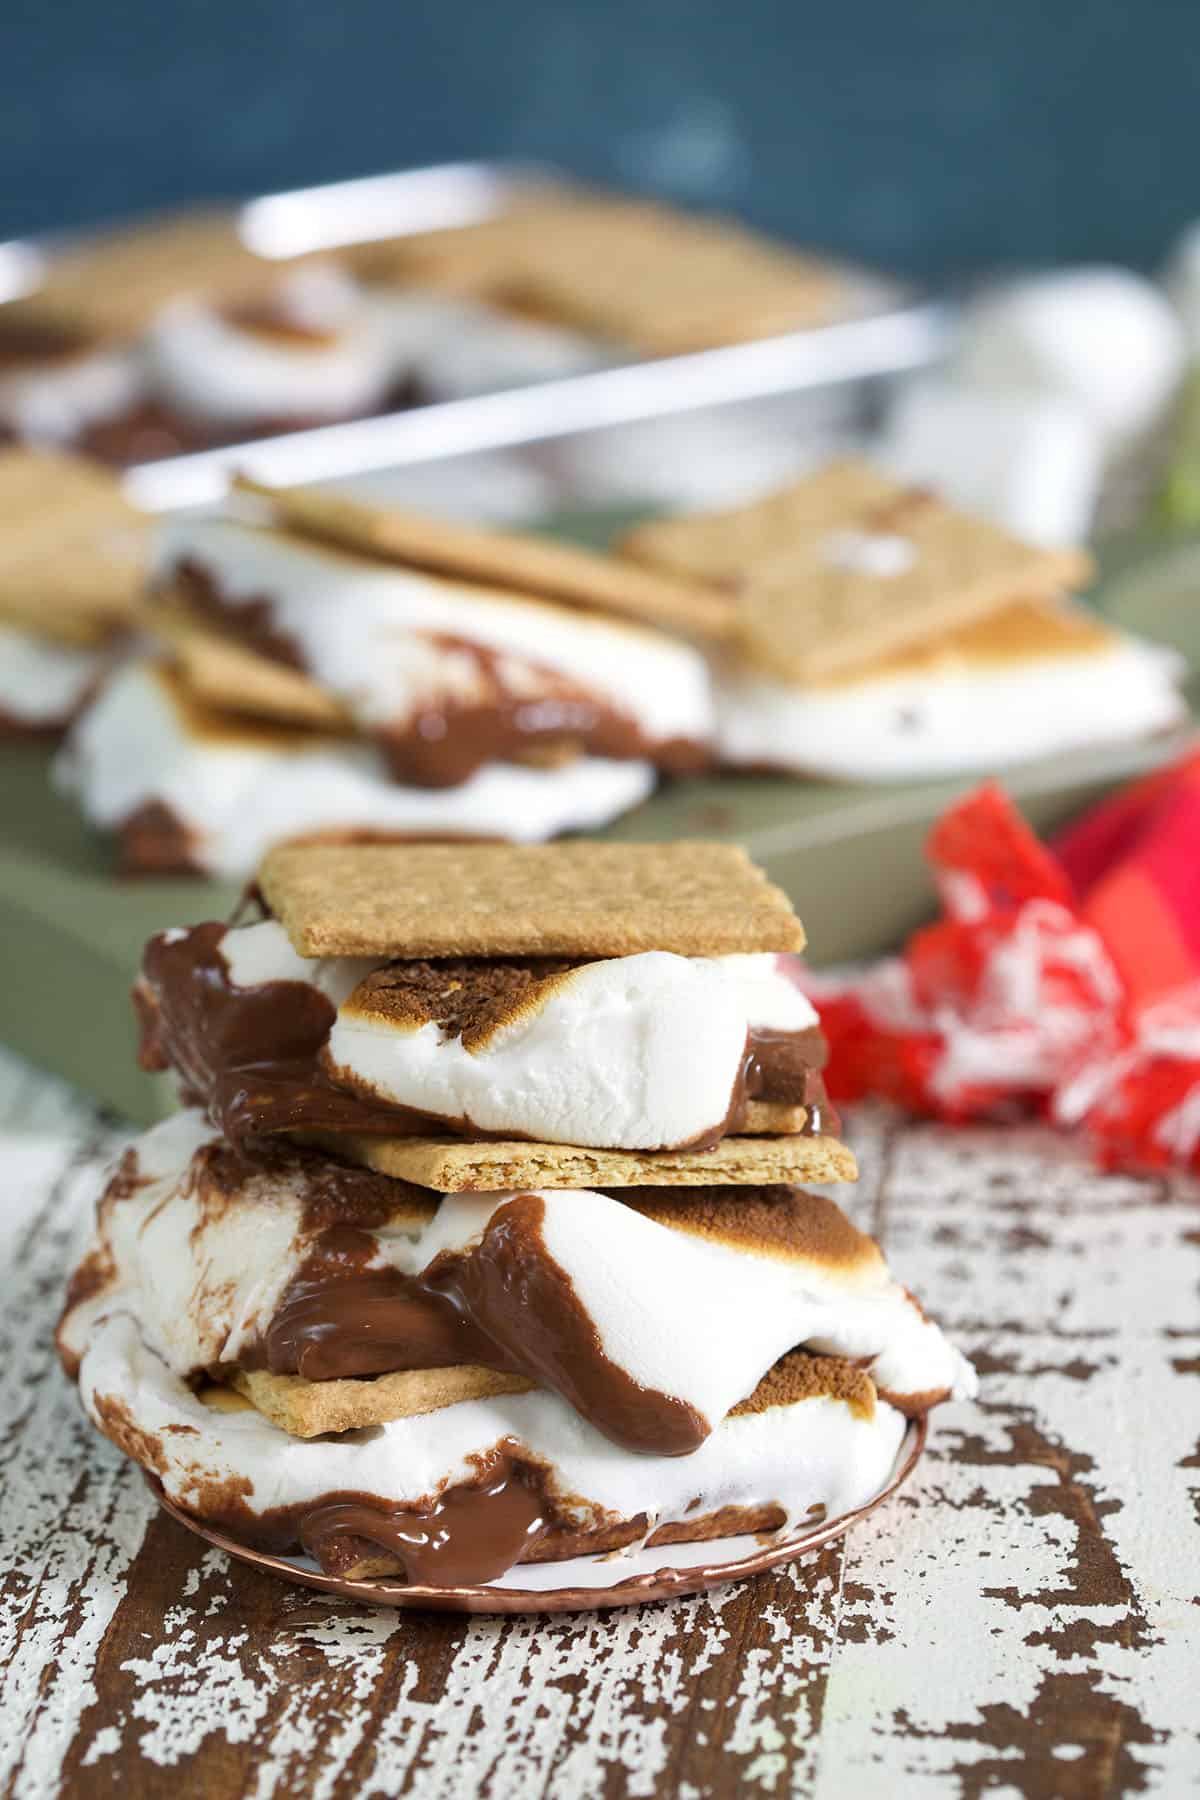 Several baked s'mores are placed next to each other on a wooden surface. 